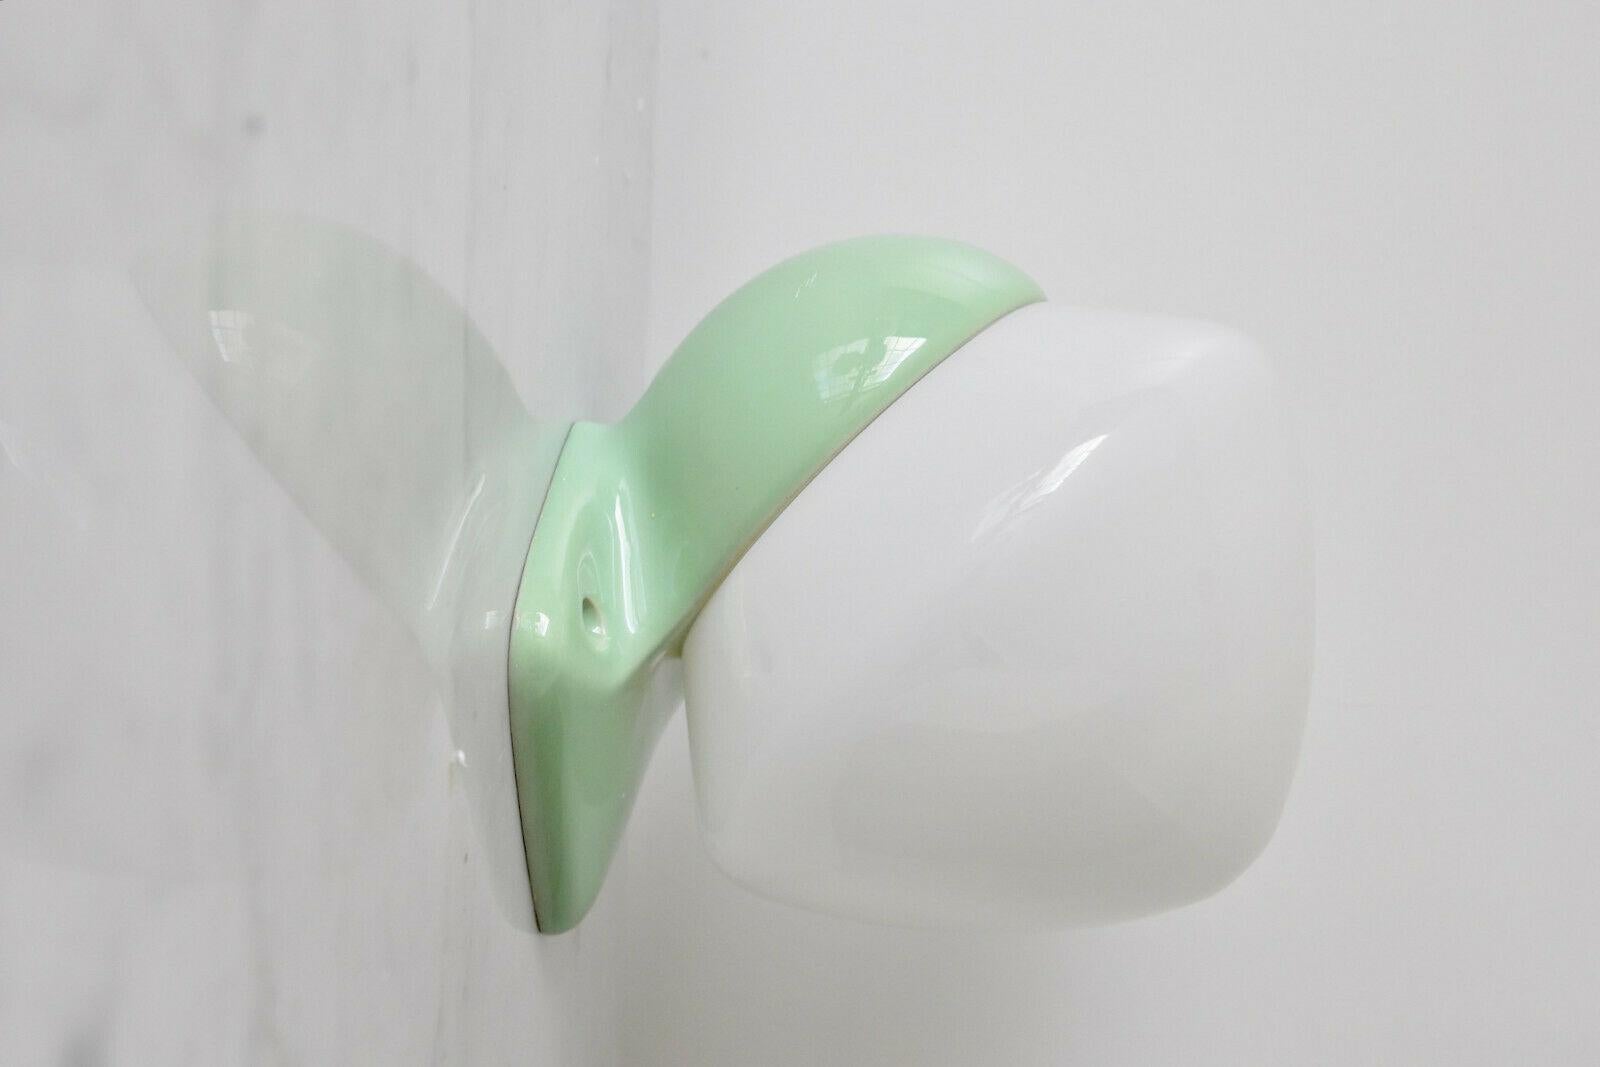 Nice vintage wall lamp design by Sigvard Bernadotte manufactured by infö Electric in 1950s Sweden. Opaline glass with porcelain socket. With E27/26 Edison screw socket (ready to use worldwide) in very nice condition. Ready to use with 110 or 250